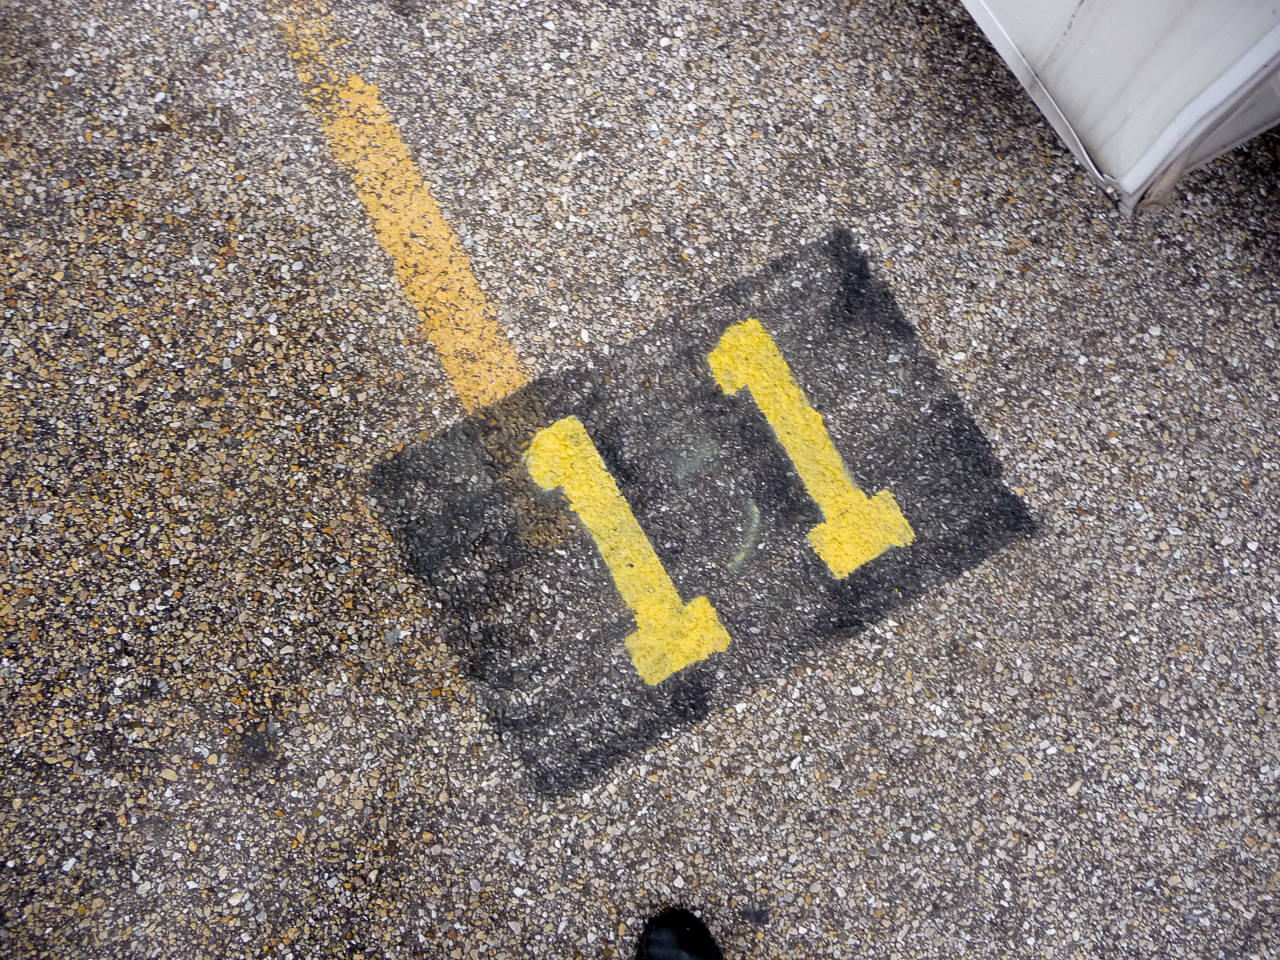 Numbered parking spaces